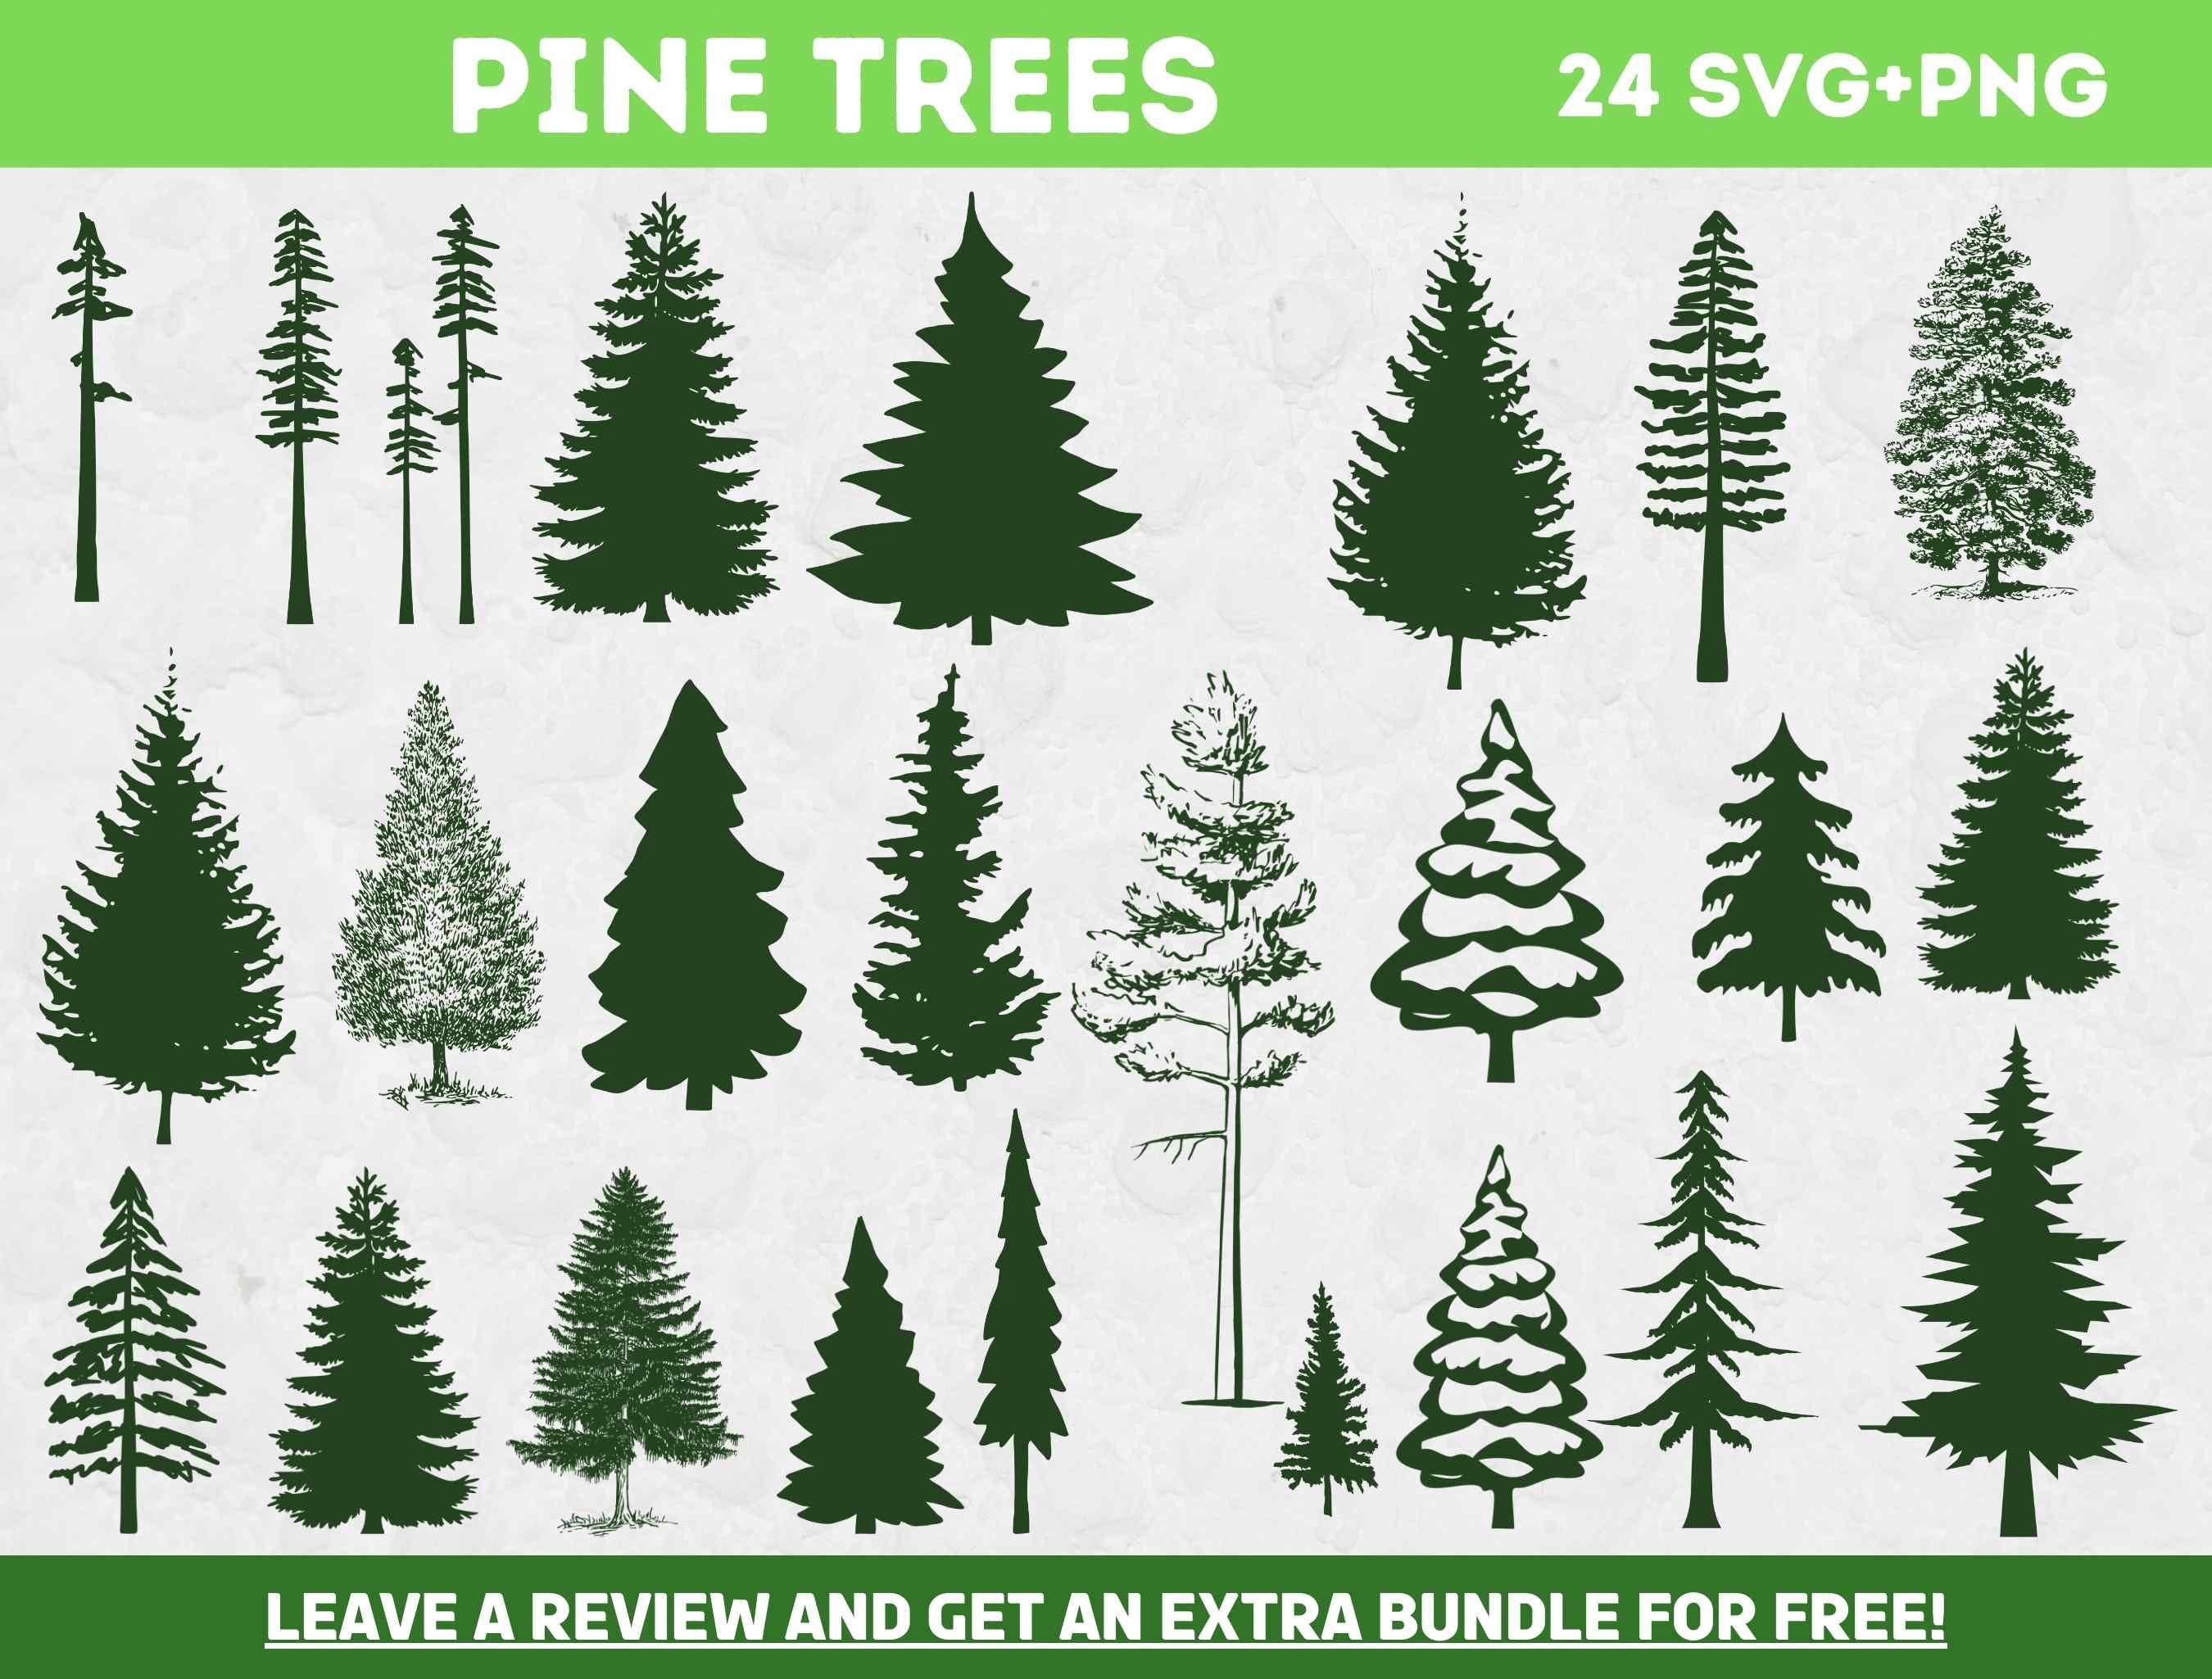 Pine Tree Svg Bundle, Pine Tree Cut Files, SVG Files for Cricut, Tree Silhouettes, Forest Svg, Christmas Tree Clipart, Tree Clipart, Xmas